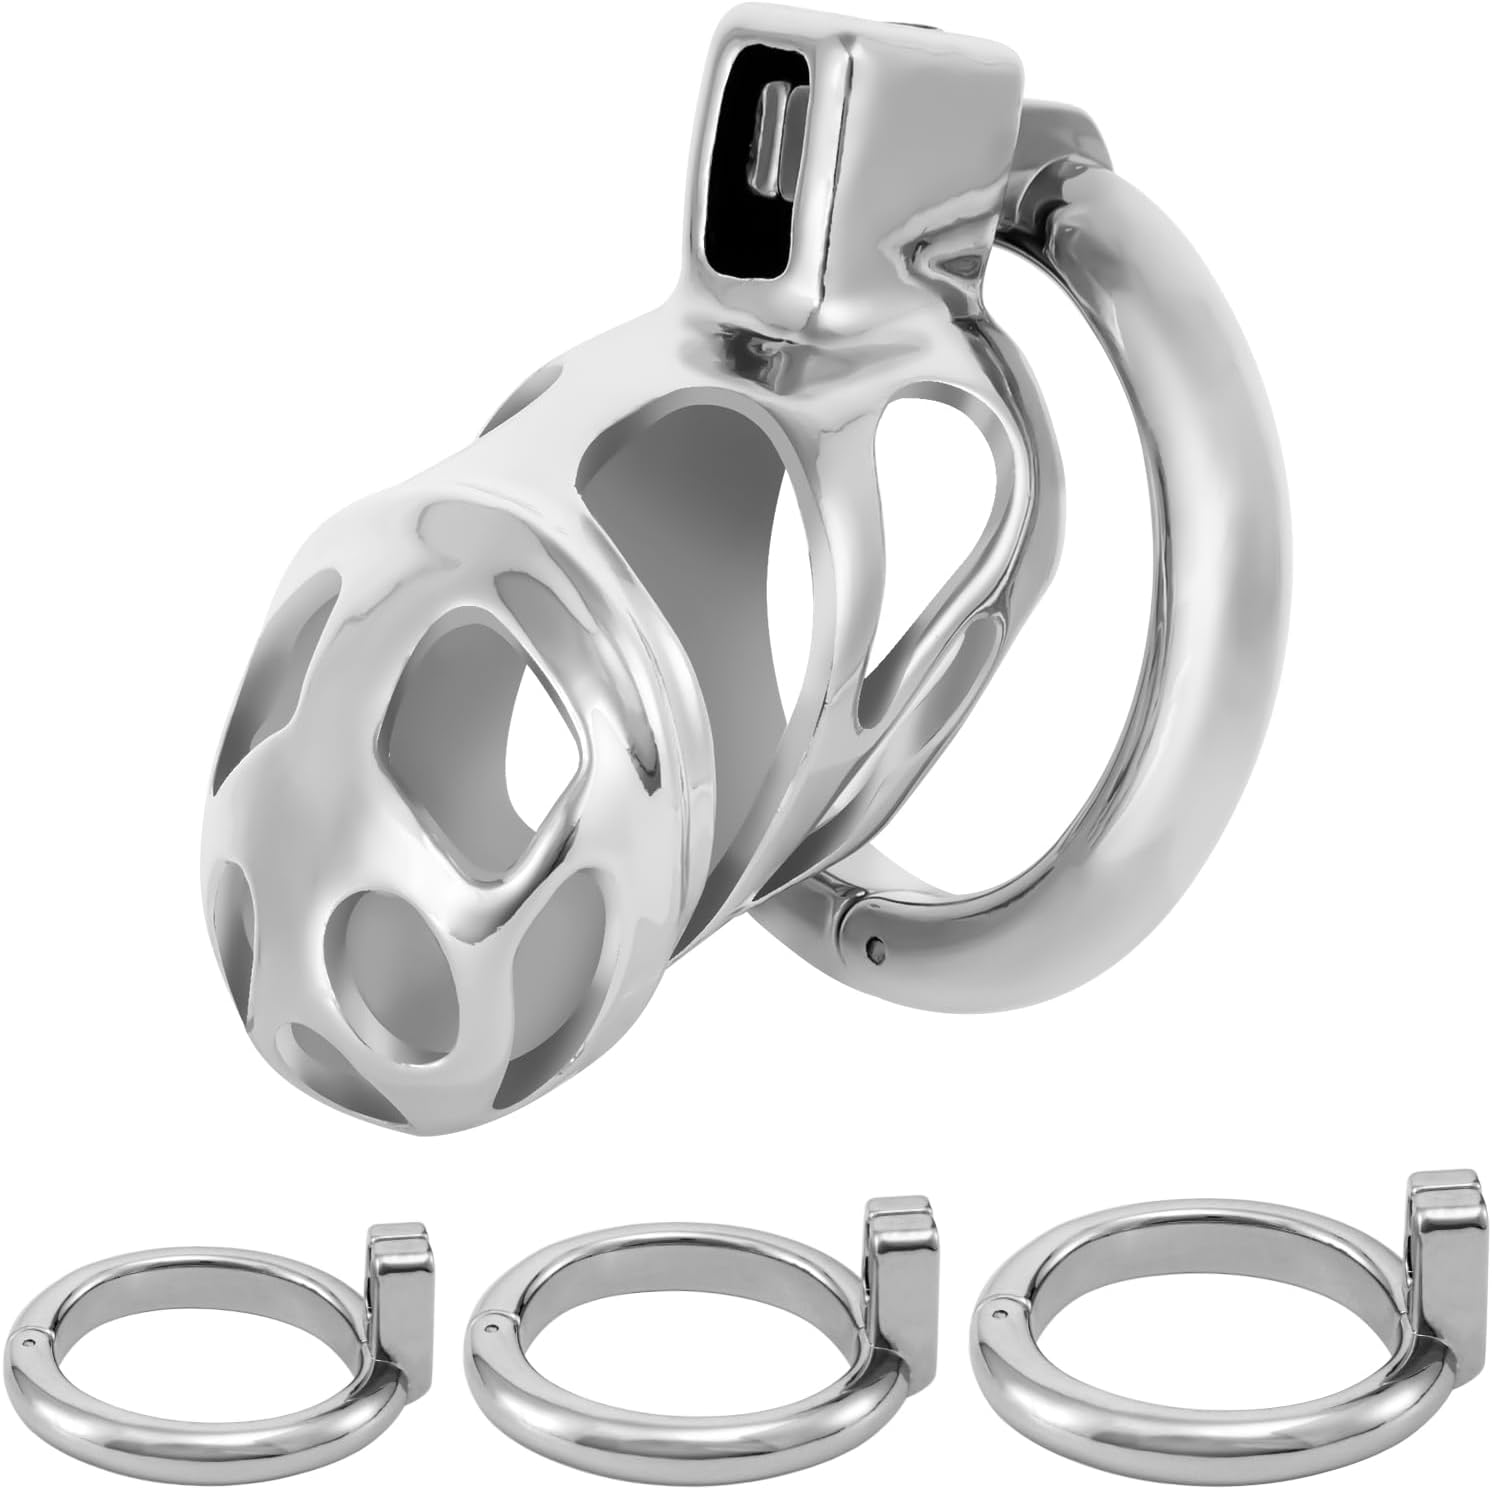 Uleade Male Chastity Device Cock Cage Steel Metal Silver Locked Cage Sex  Toy for Men (3 Rings), Lock and 2 Keys Included